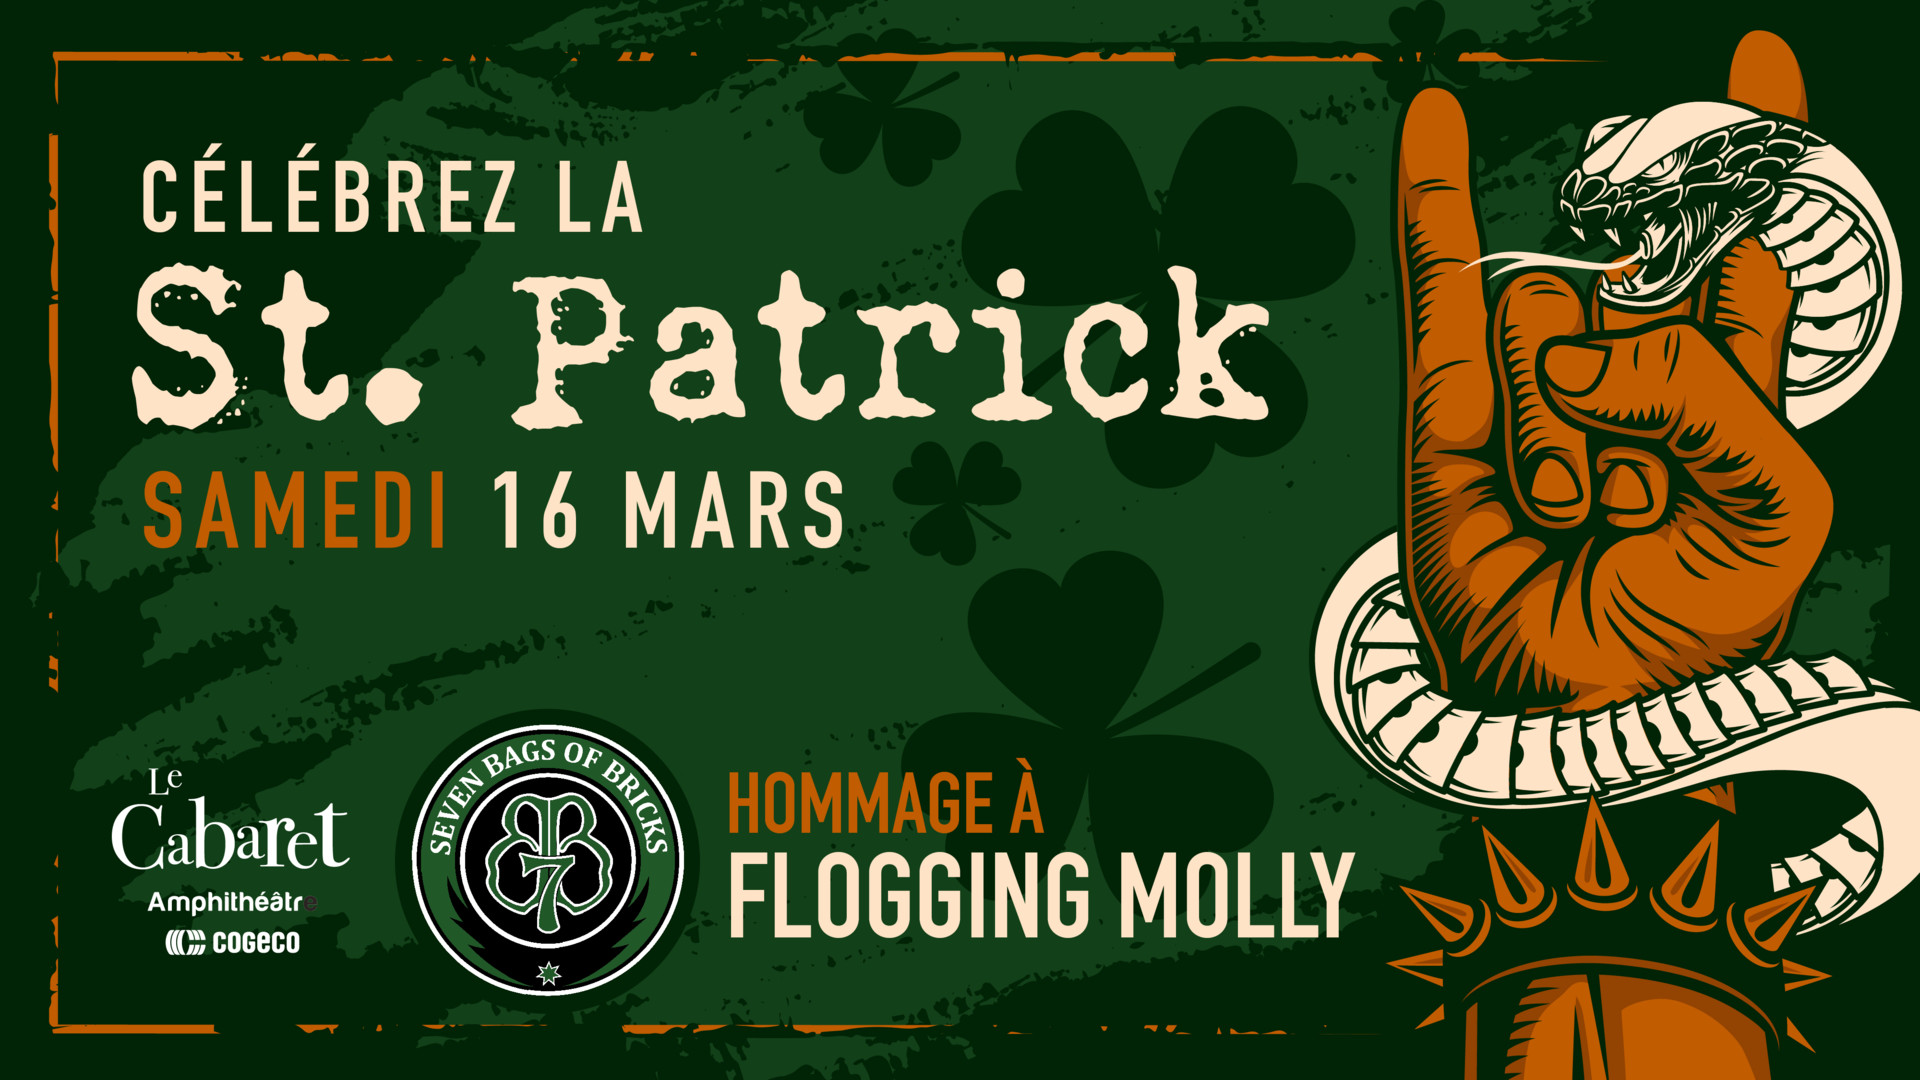 Hommage à Flogging Molly